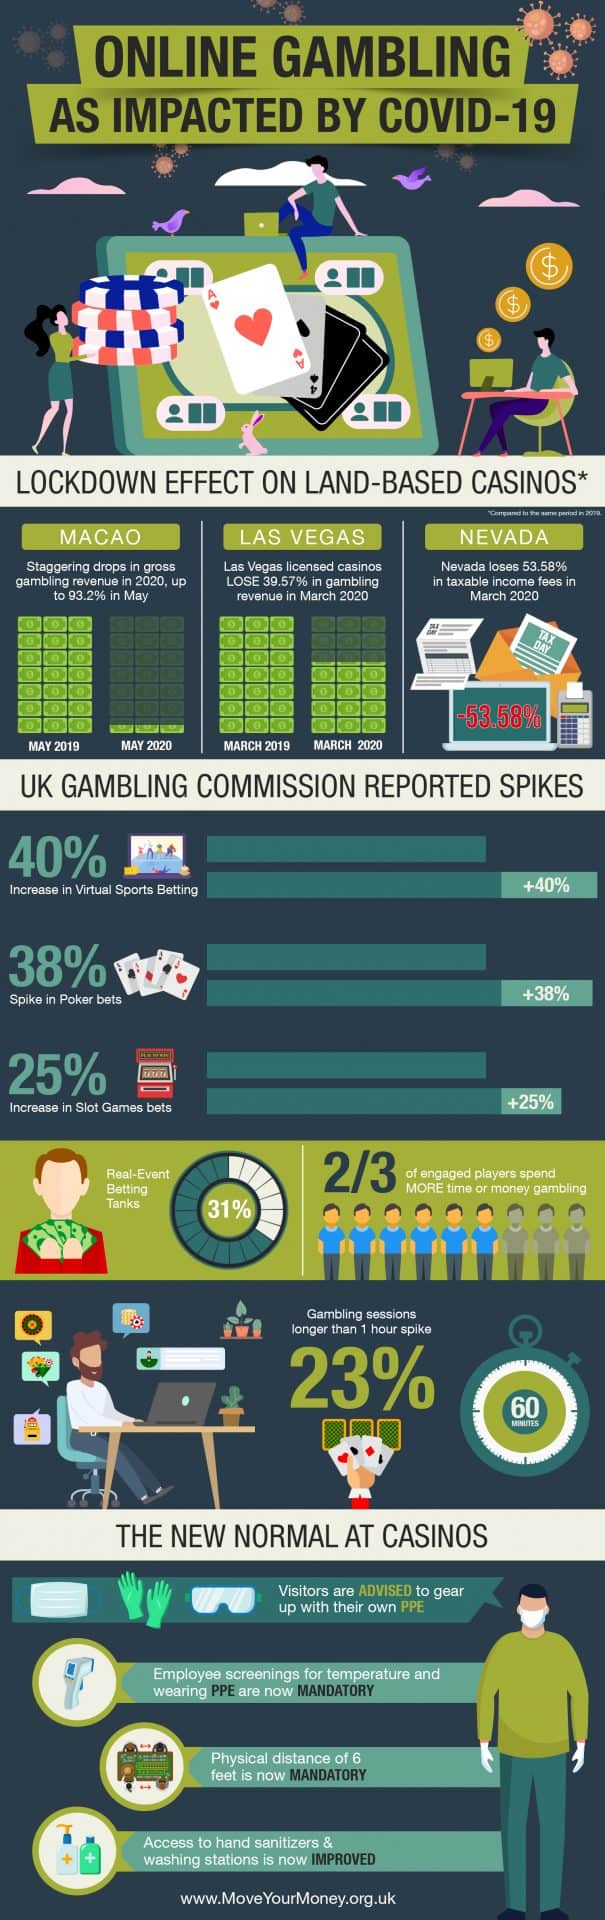 Online gambling as impacted by the Covid-19